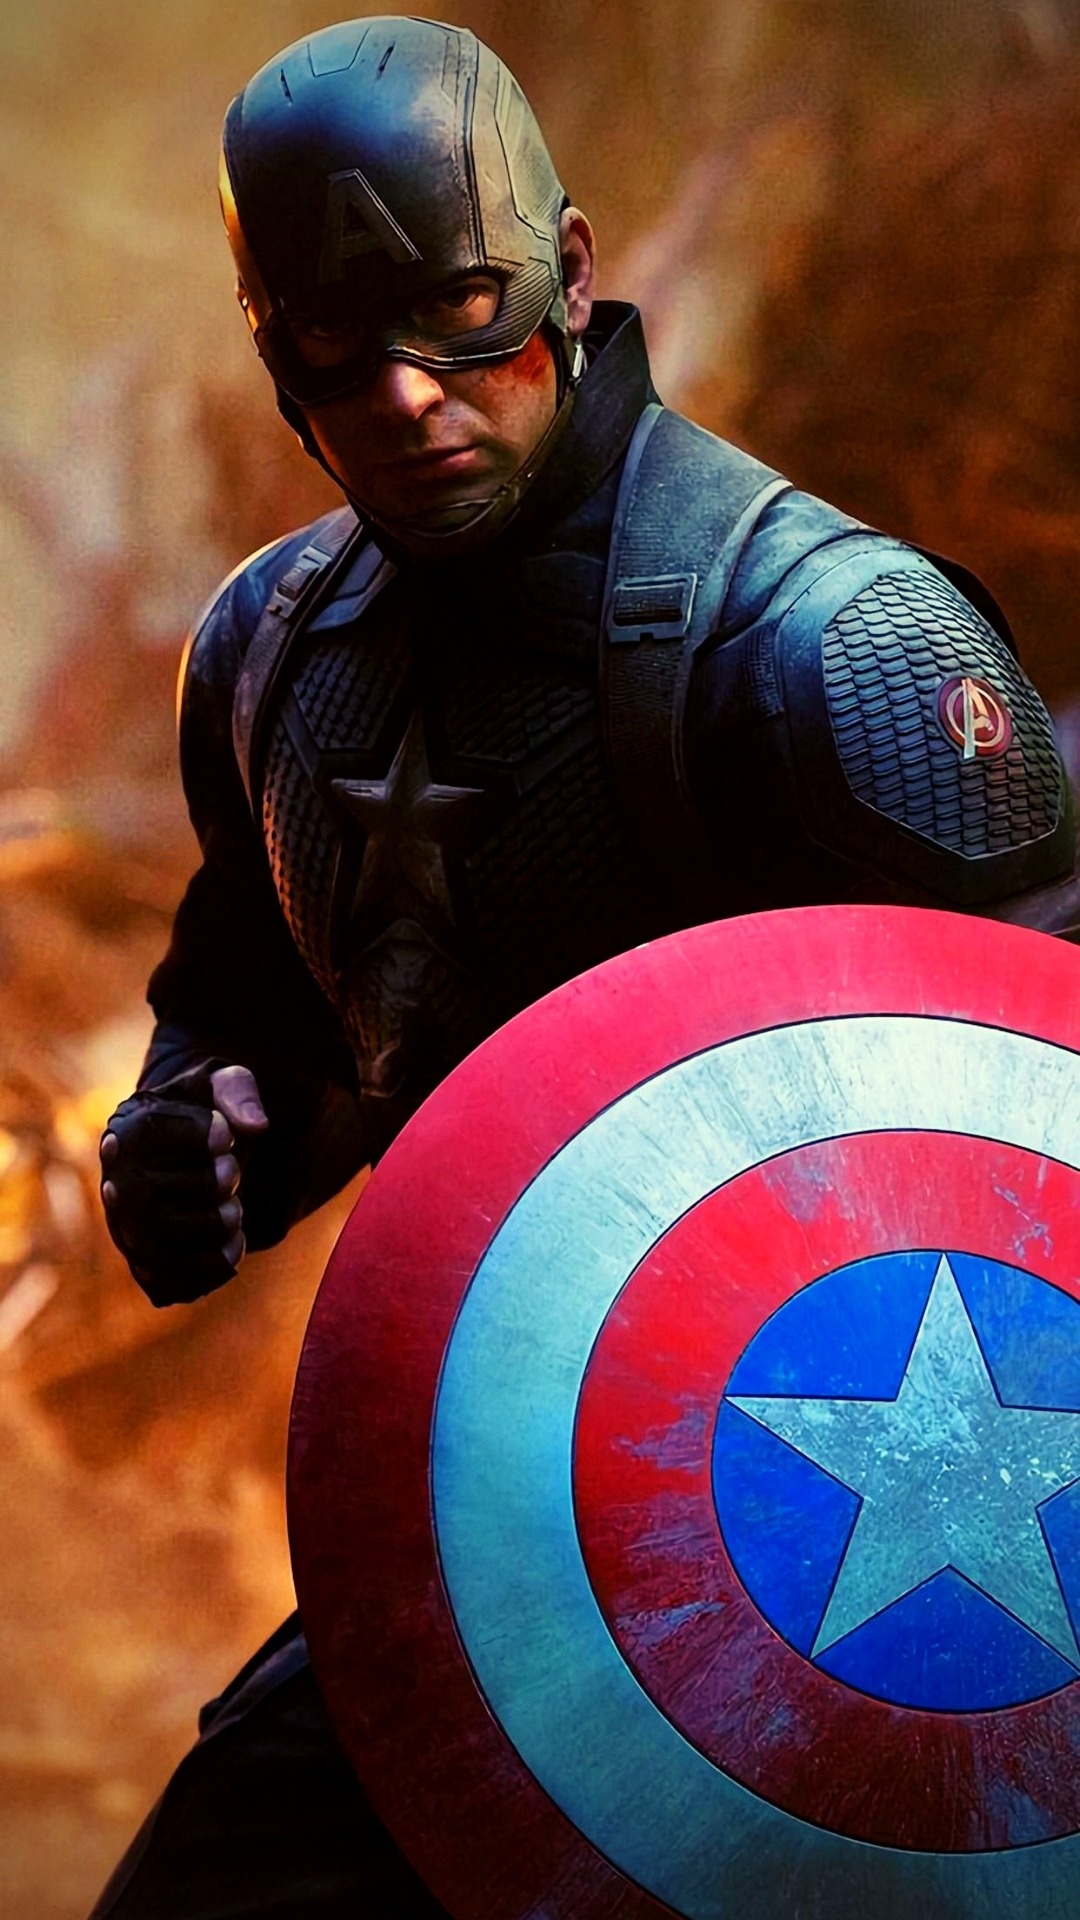 Captain America: Fought against many notable villains, including the Red Skull, Baron Zemo, and Crossbones. 1080x1920 Full HD Wallpaper.